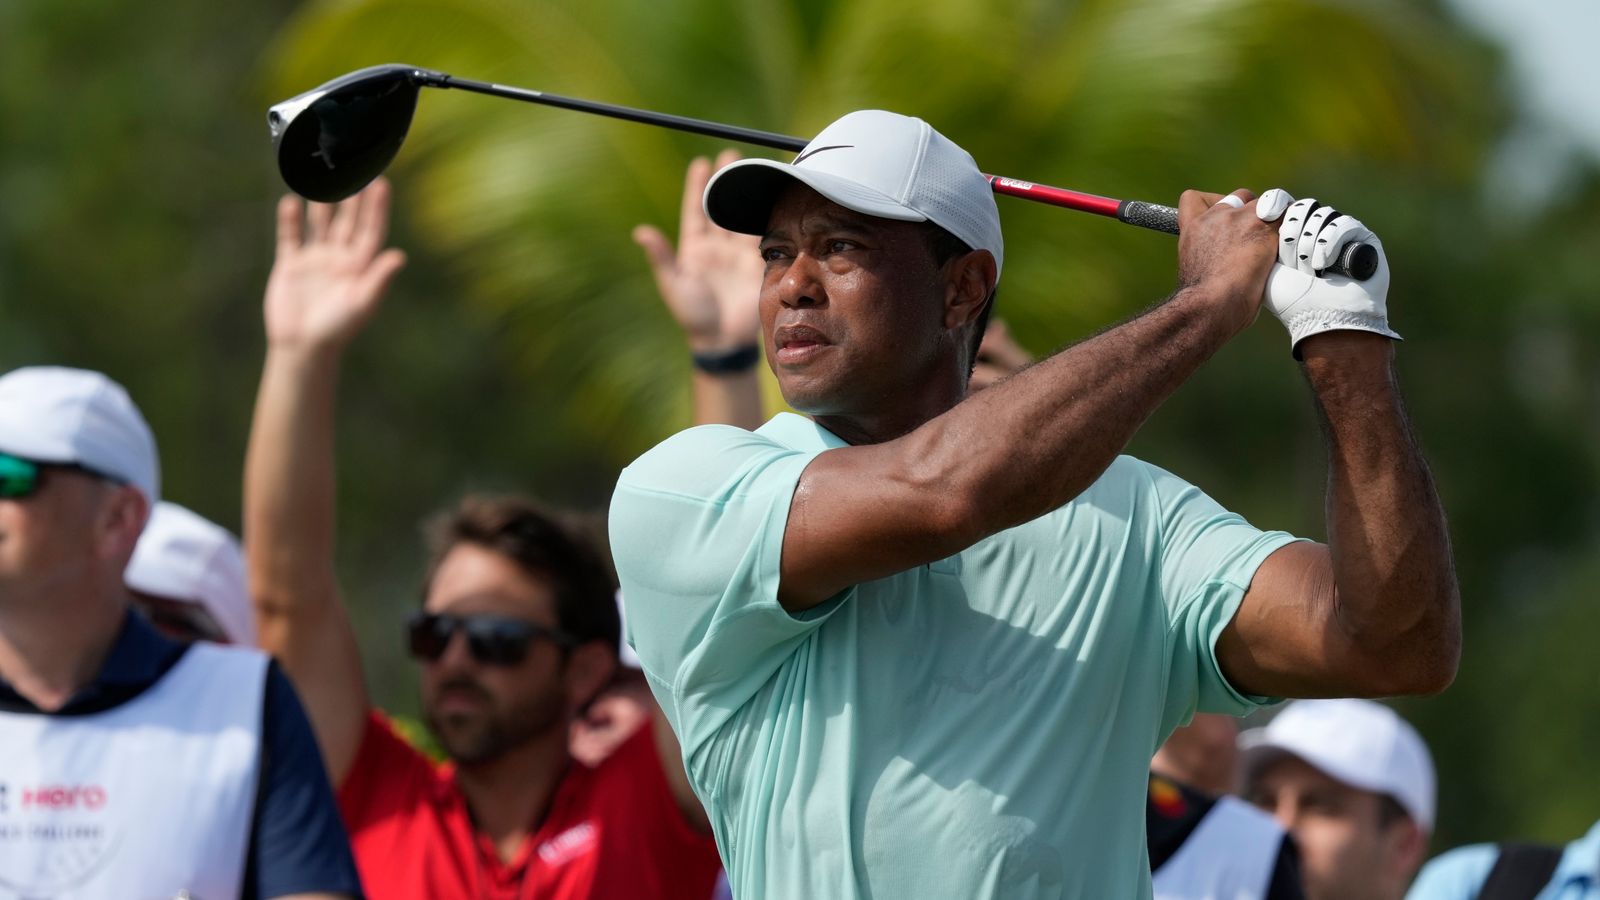 Tiger Woods unable to make progress at Hero World Challenge after rollercoaster third round | Golf News